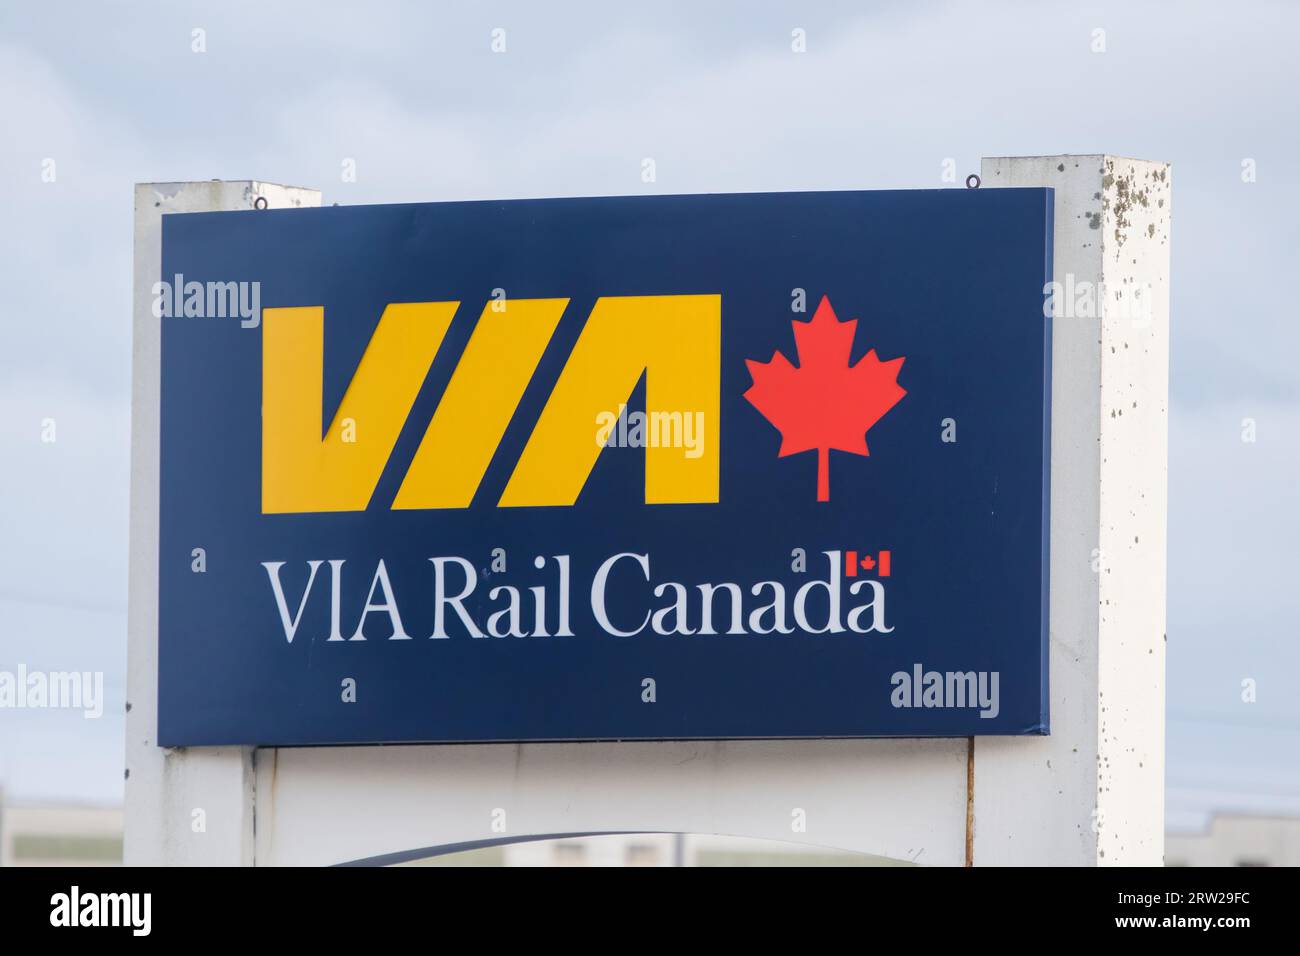 VIA Rail Canada Logo Banner at Halifax Inter-city Railway Station. Halifax forms eastern transcontinental of the VIA Rail linking Montreal to Halifax Stock Photo